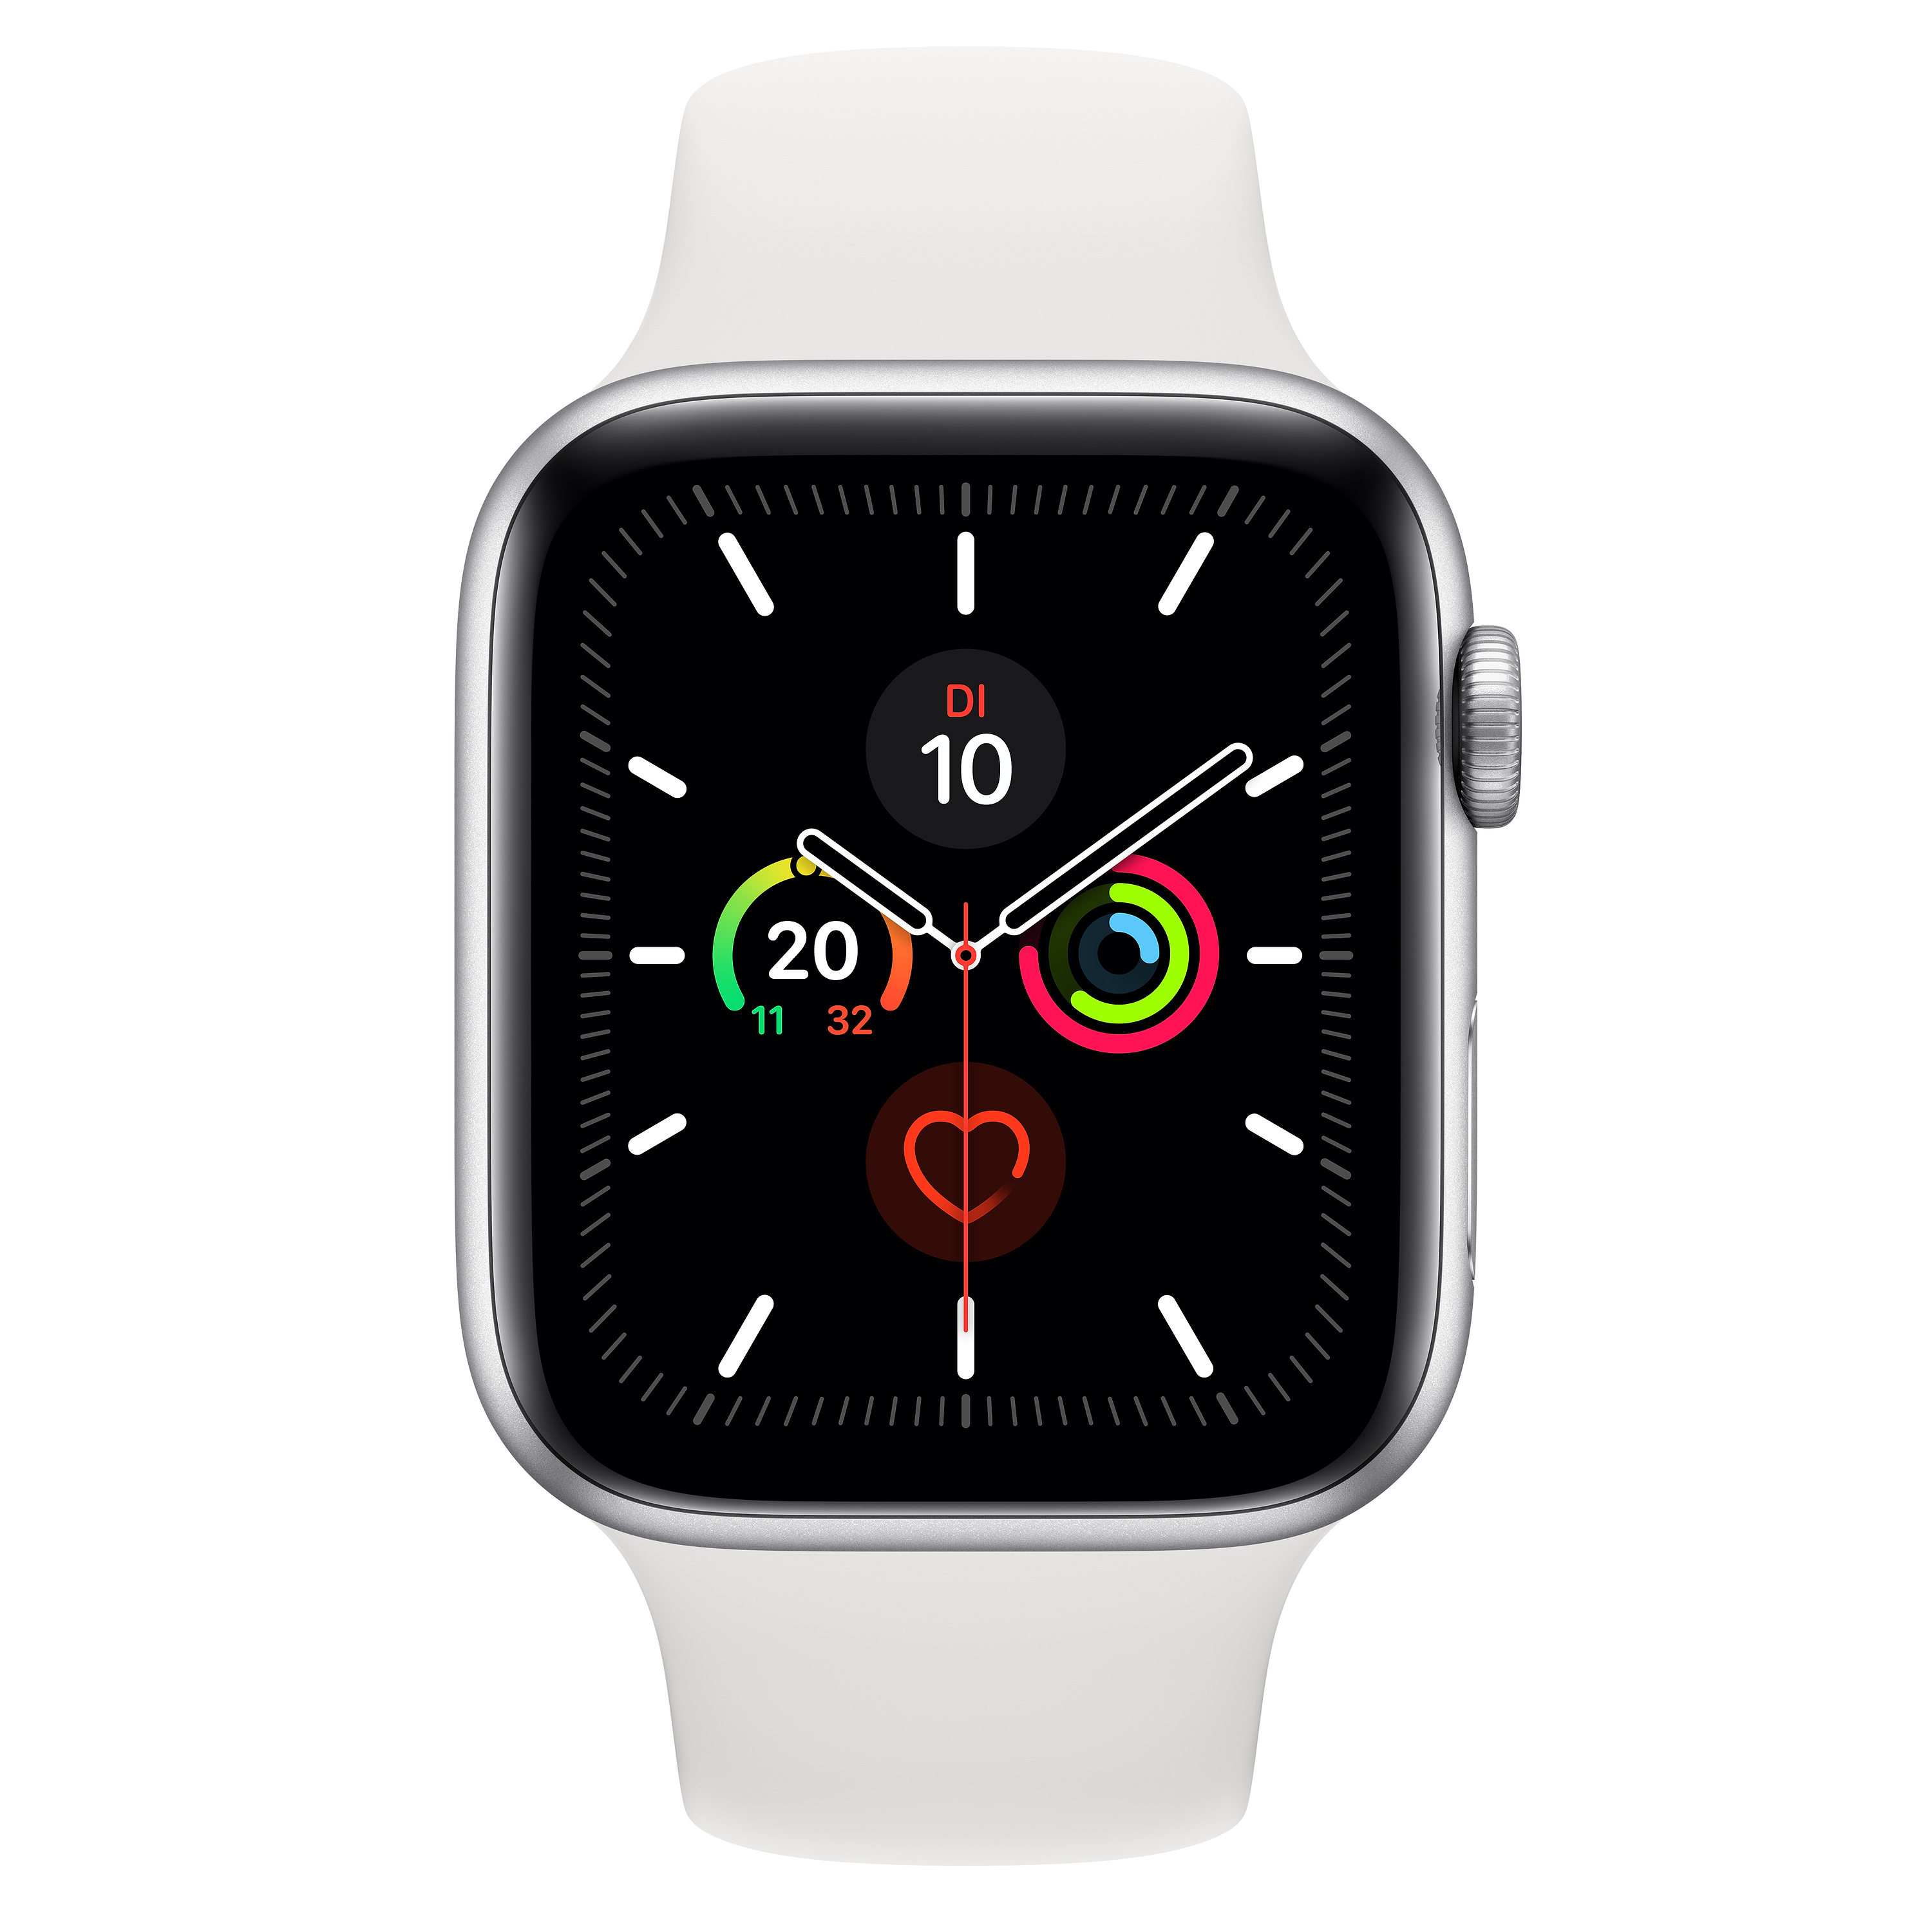 refurbed-apple-watch-series-5-from-315-now-with-a-30-day-trial-period